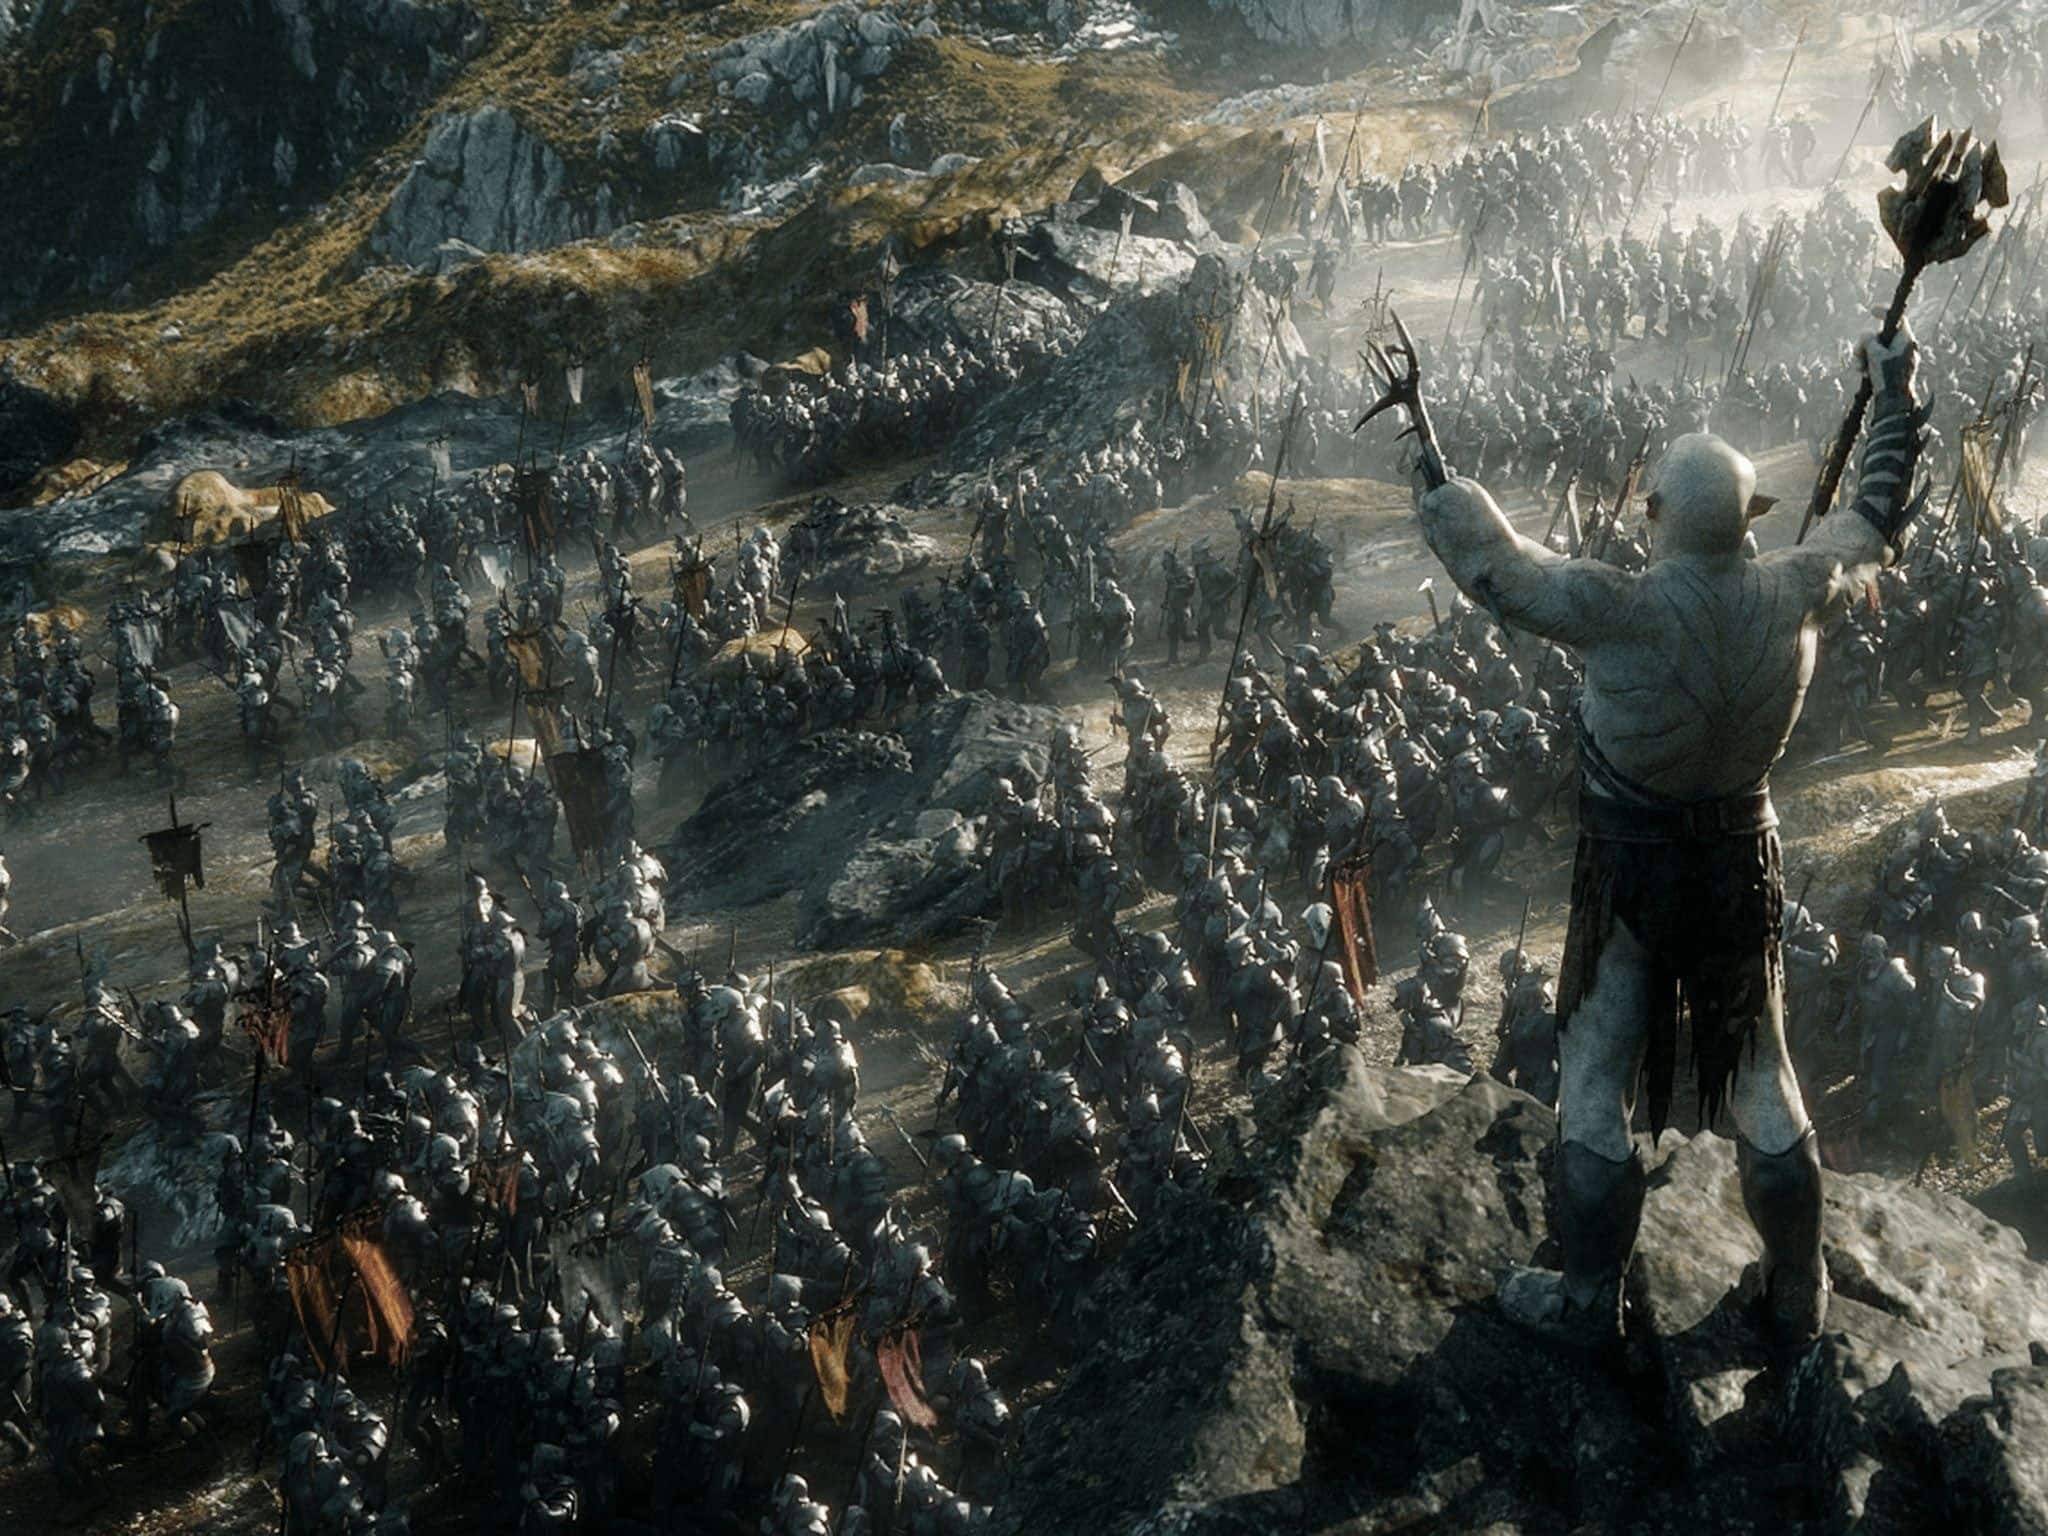 Every Lord of the Rings Movie Ranked From Best to Worst